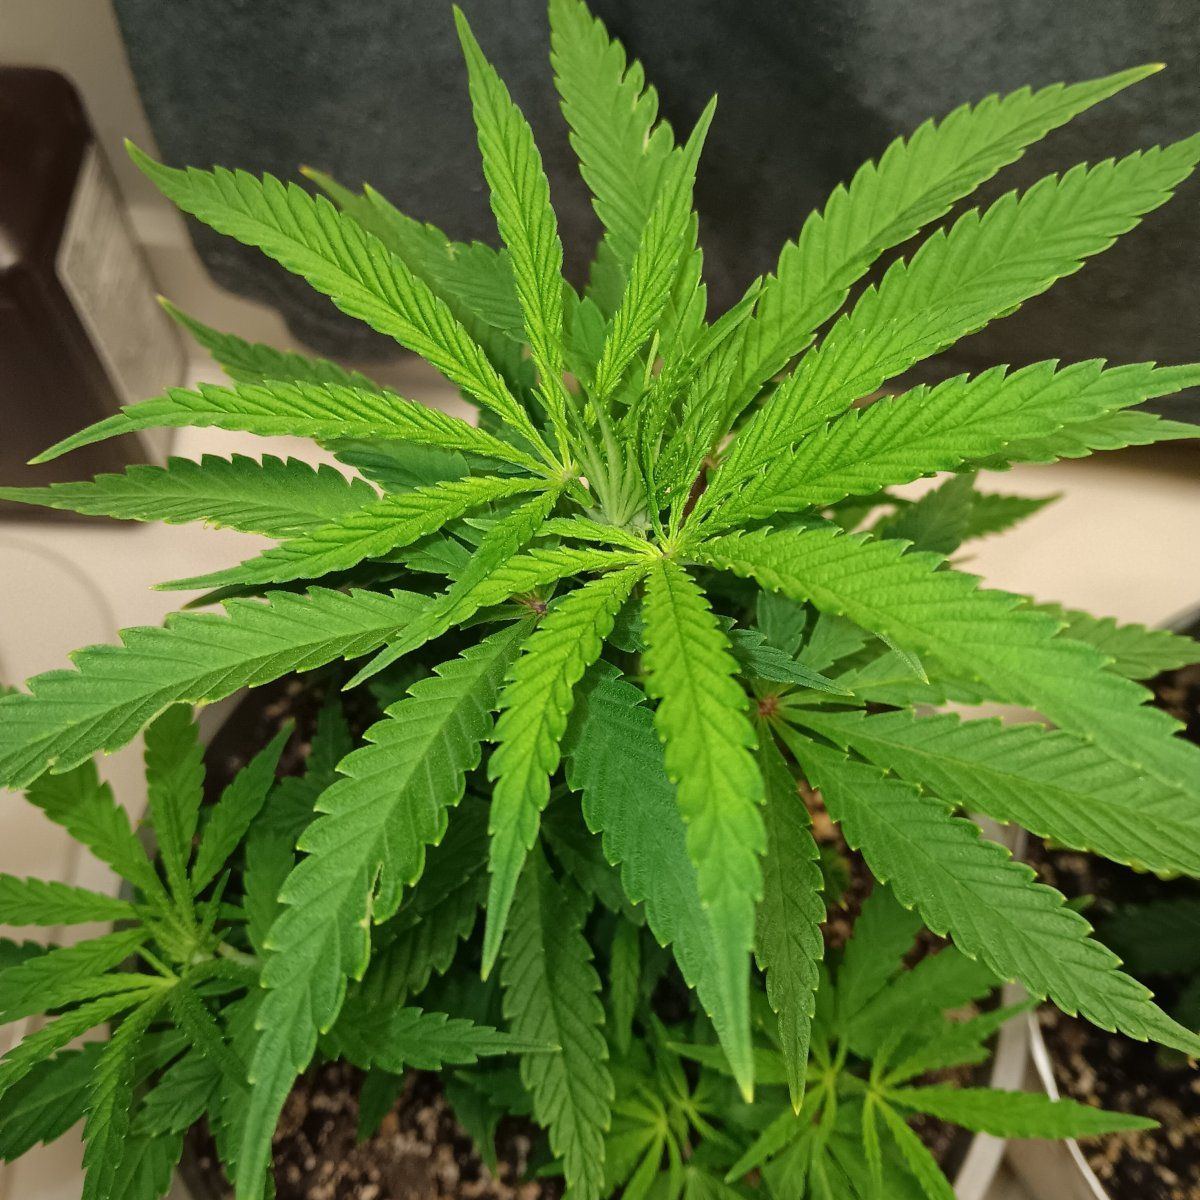 New growers question plants look too light in color on poor persons budget grow 7